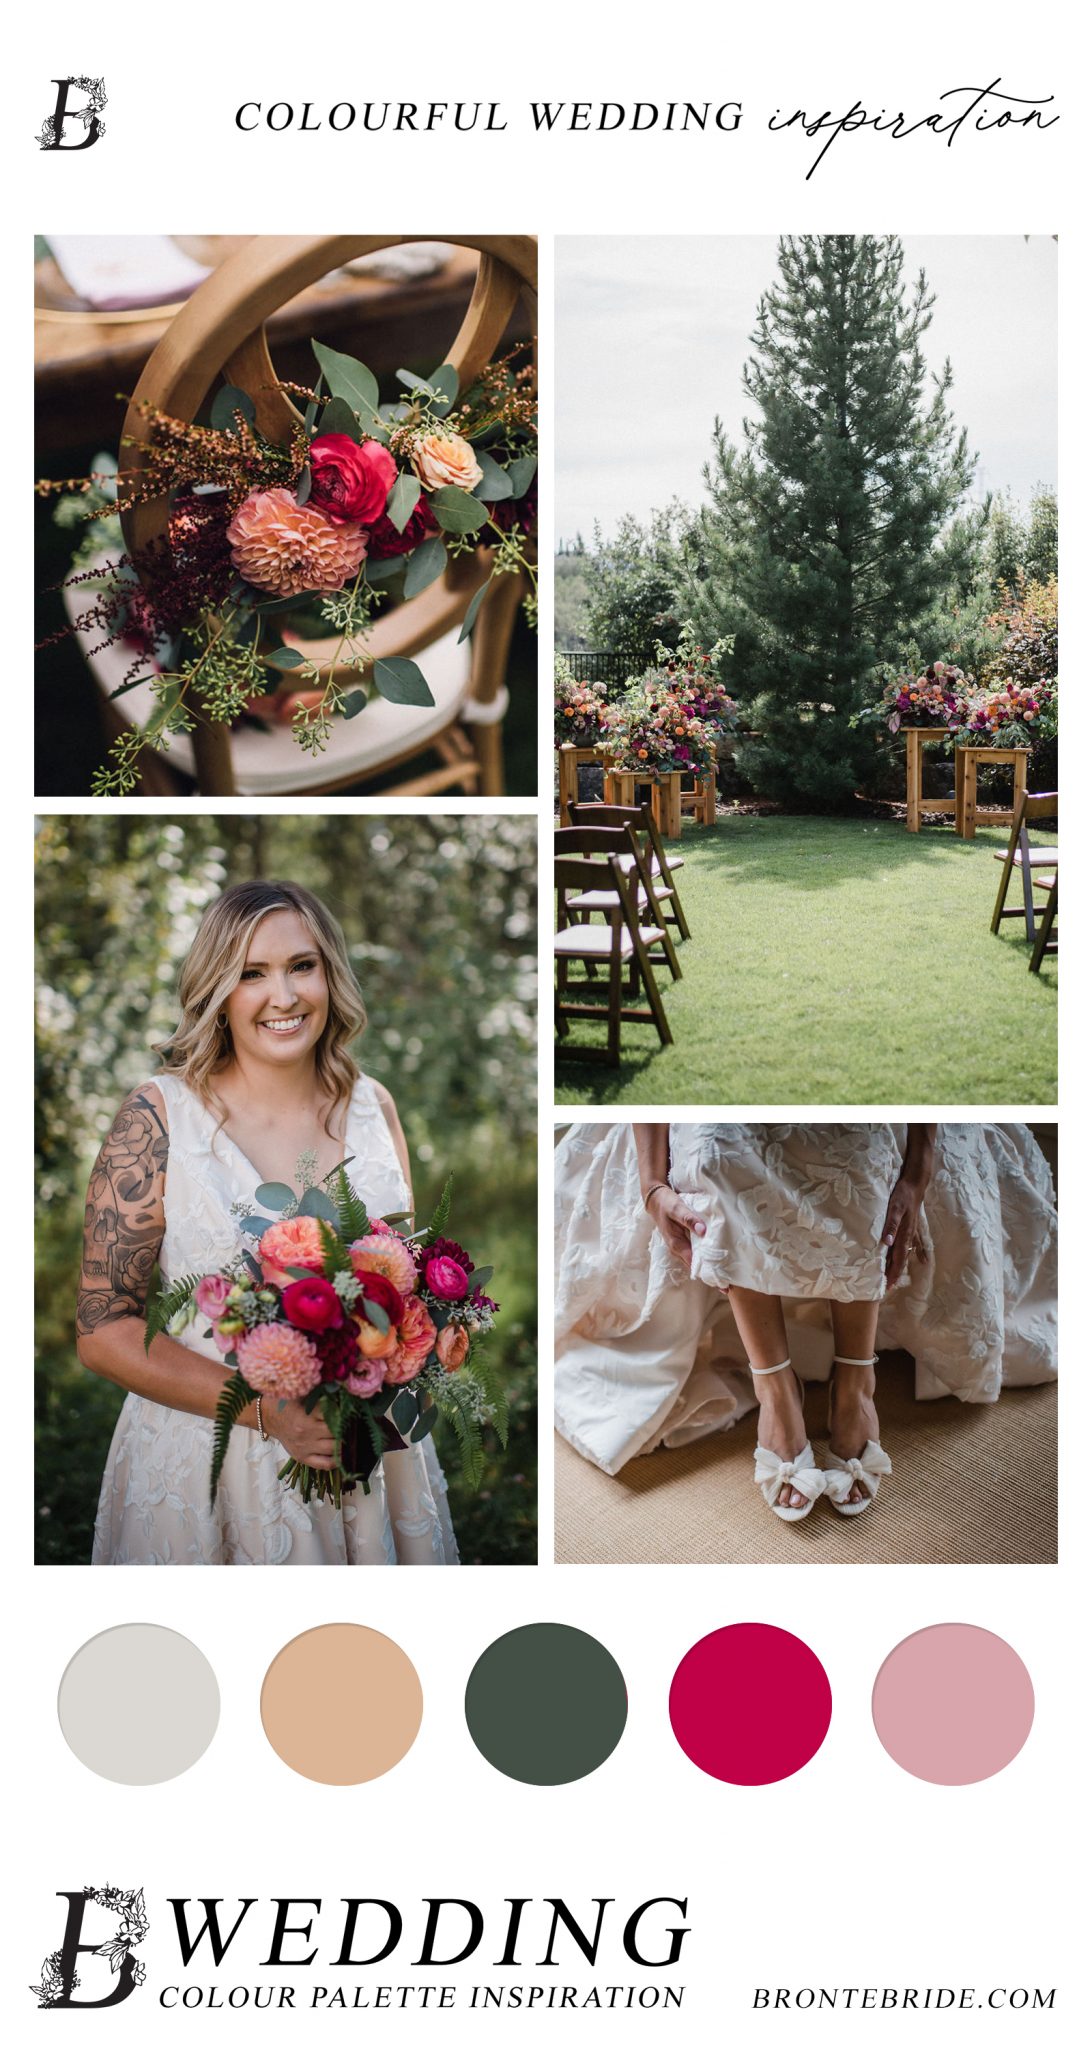 Modern Wedding Colour Palette Inspiration - Summertime Backyard Wedding Featuring Fabulously Bright & Colourful Florals - Real Wedding featured on Bronte Bride